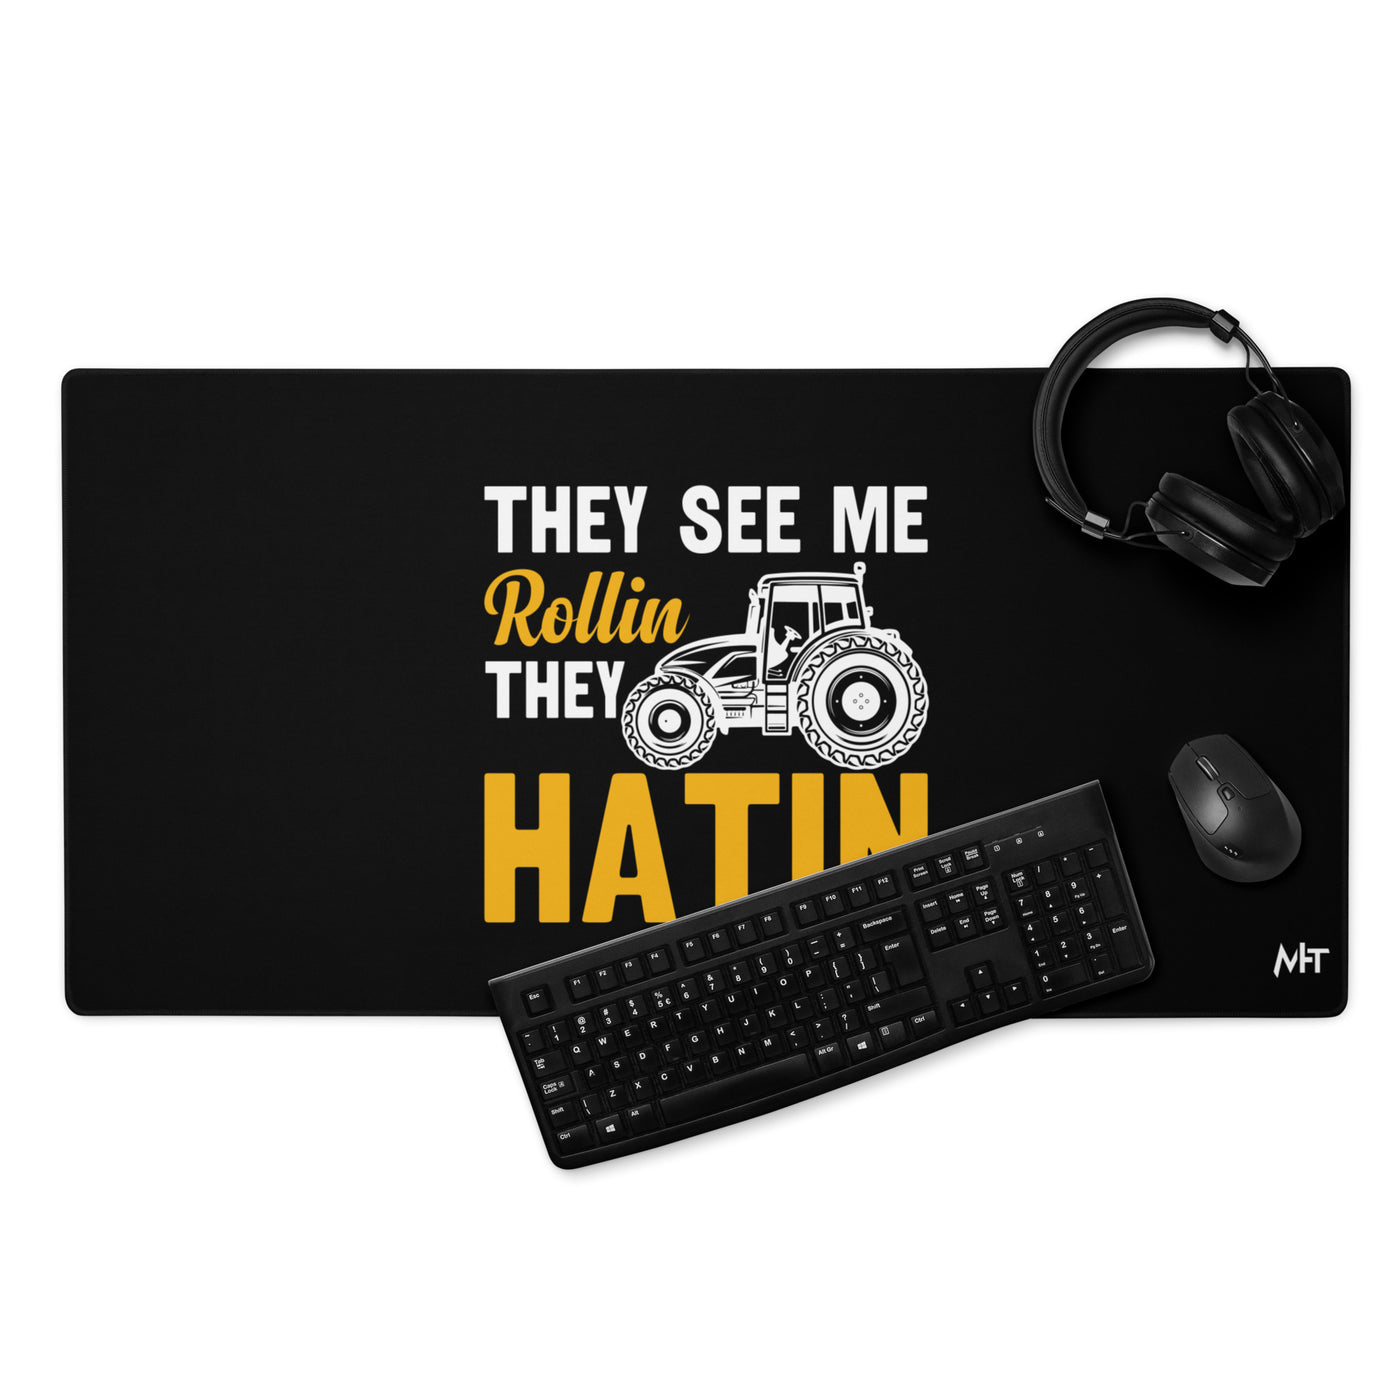 They see me Rolling, they hatin - Desk Mat